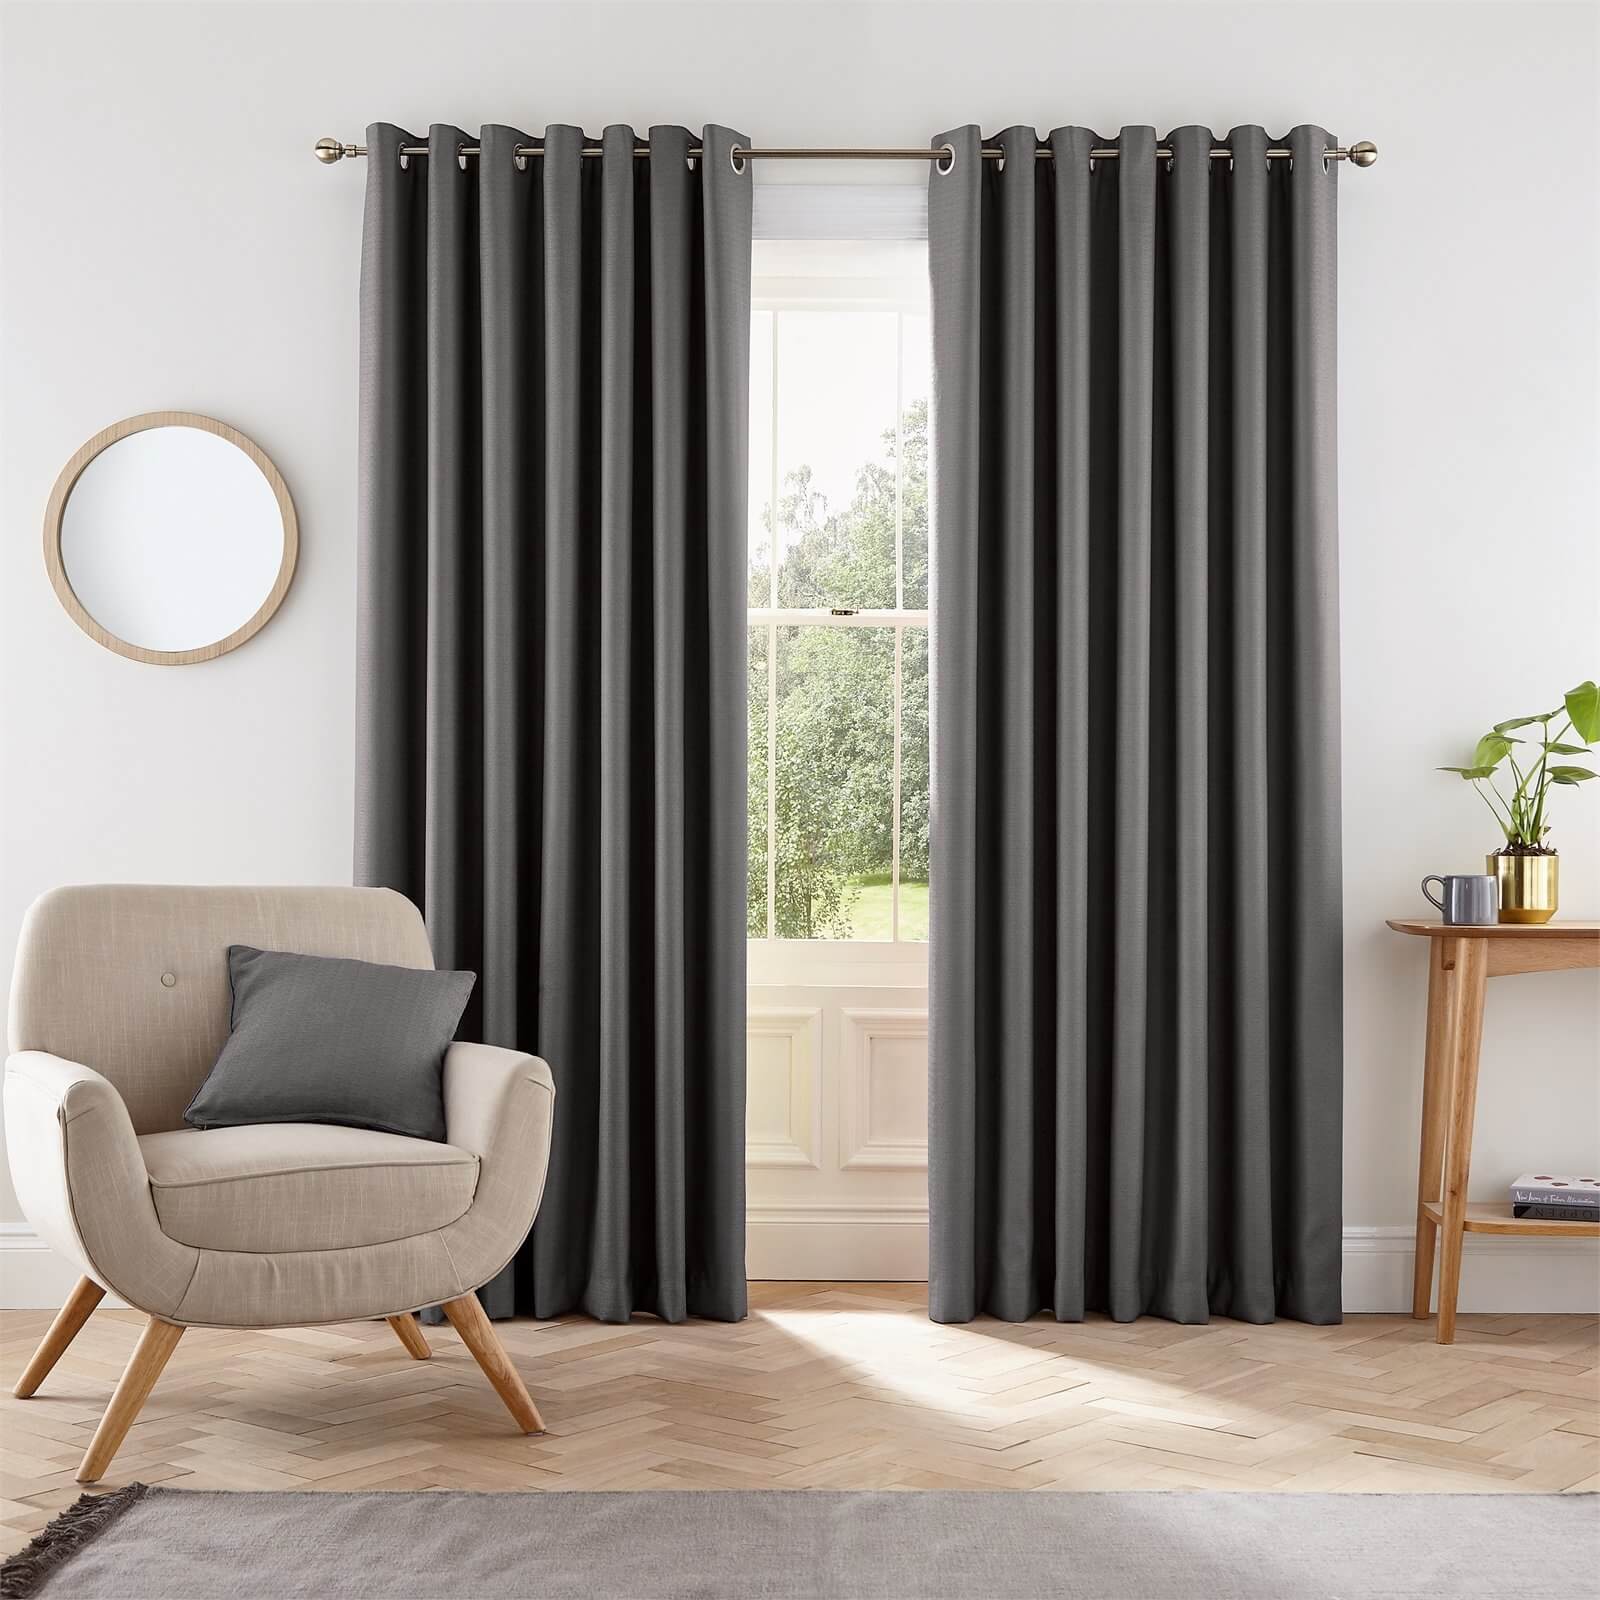 Helena Springfield Eden Lined Curtains 90 x 72 - Charcoal